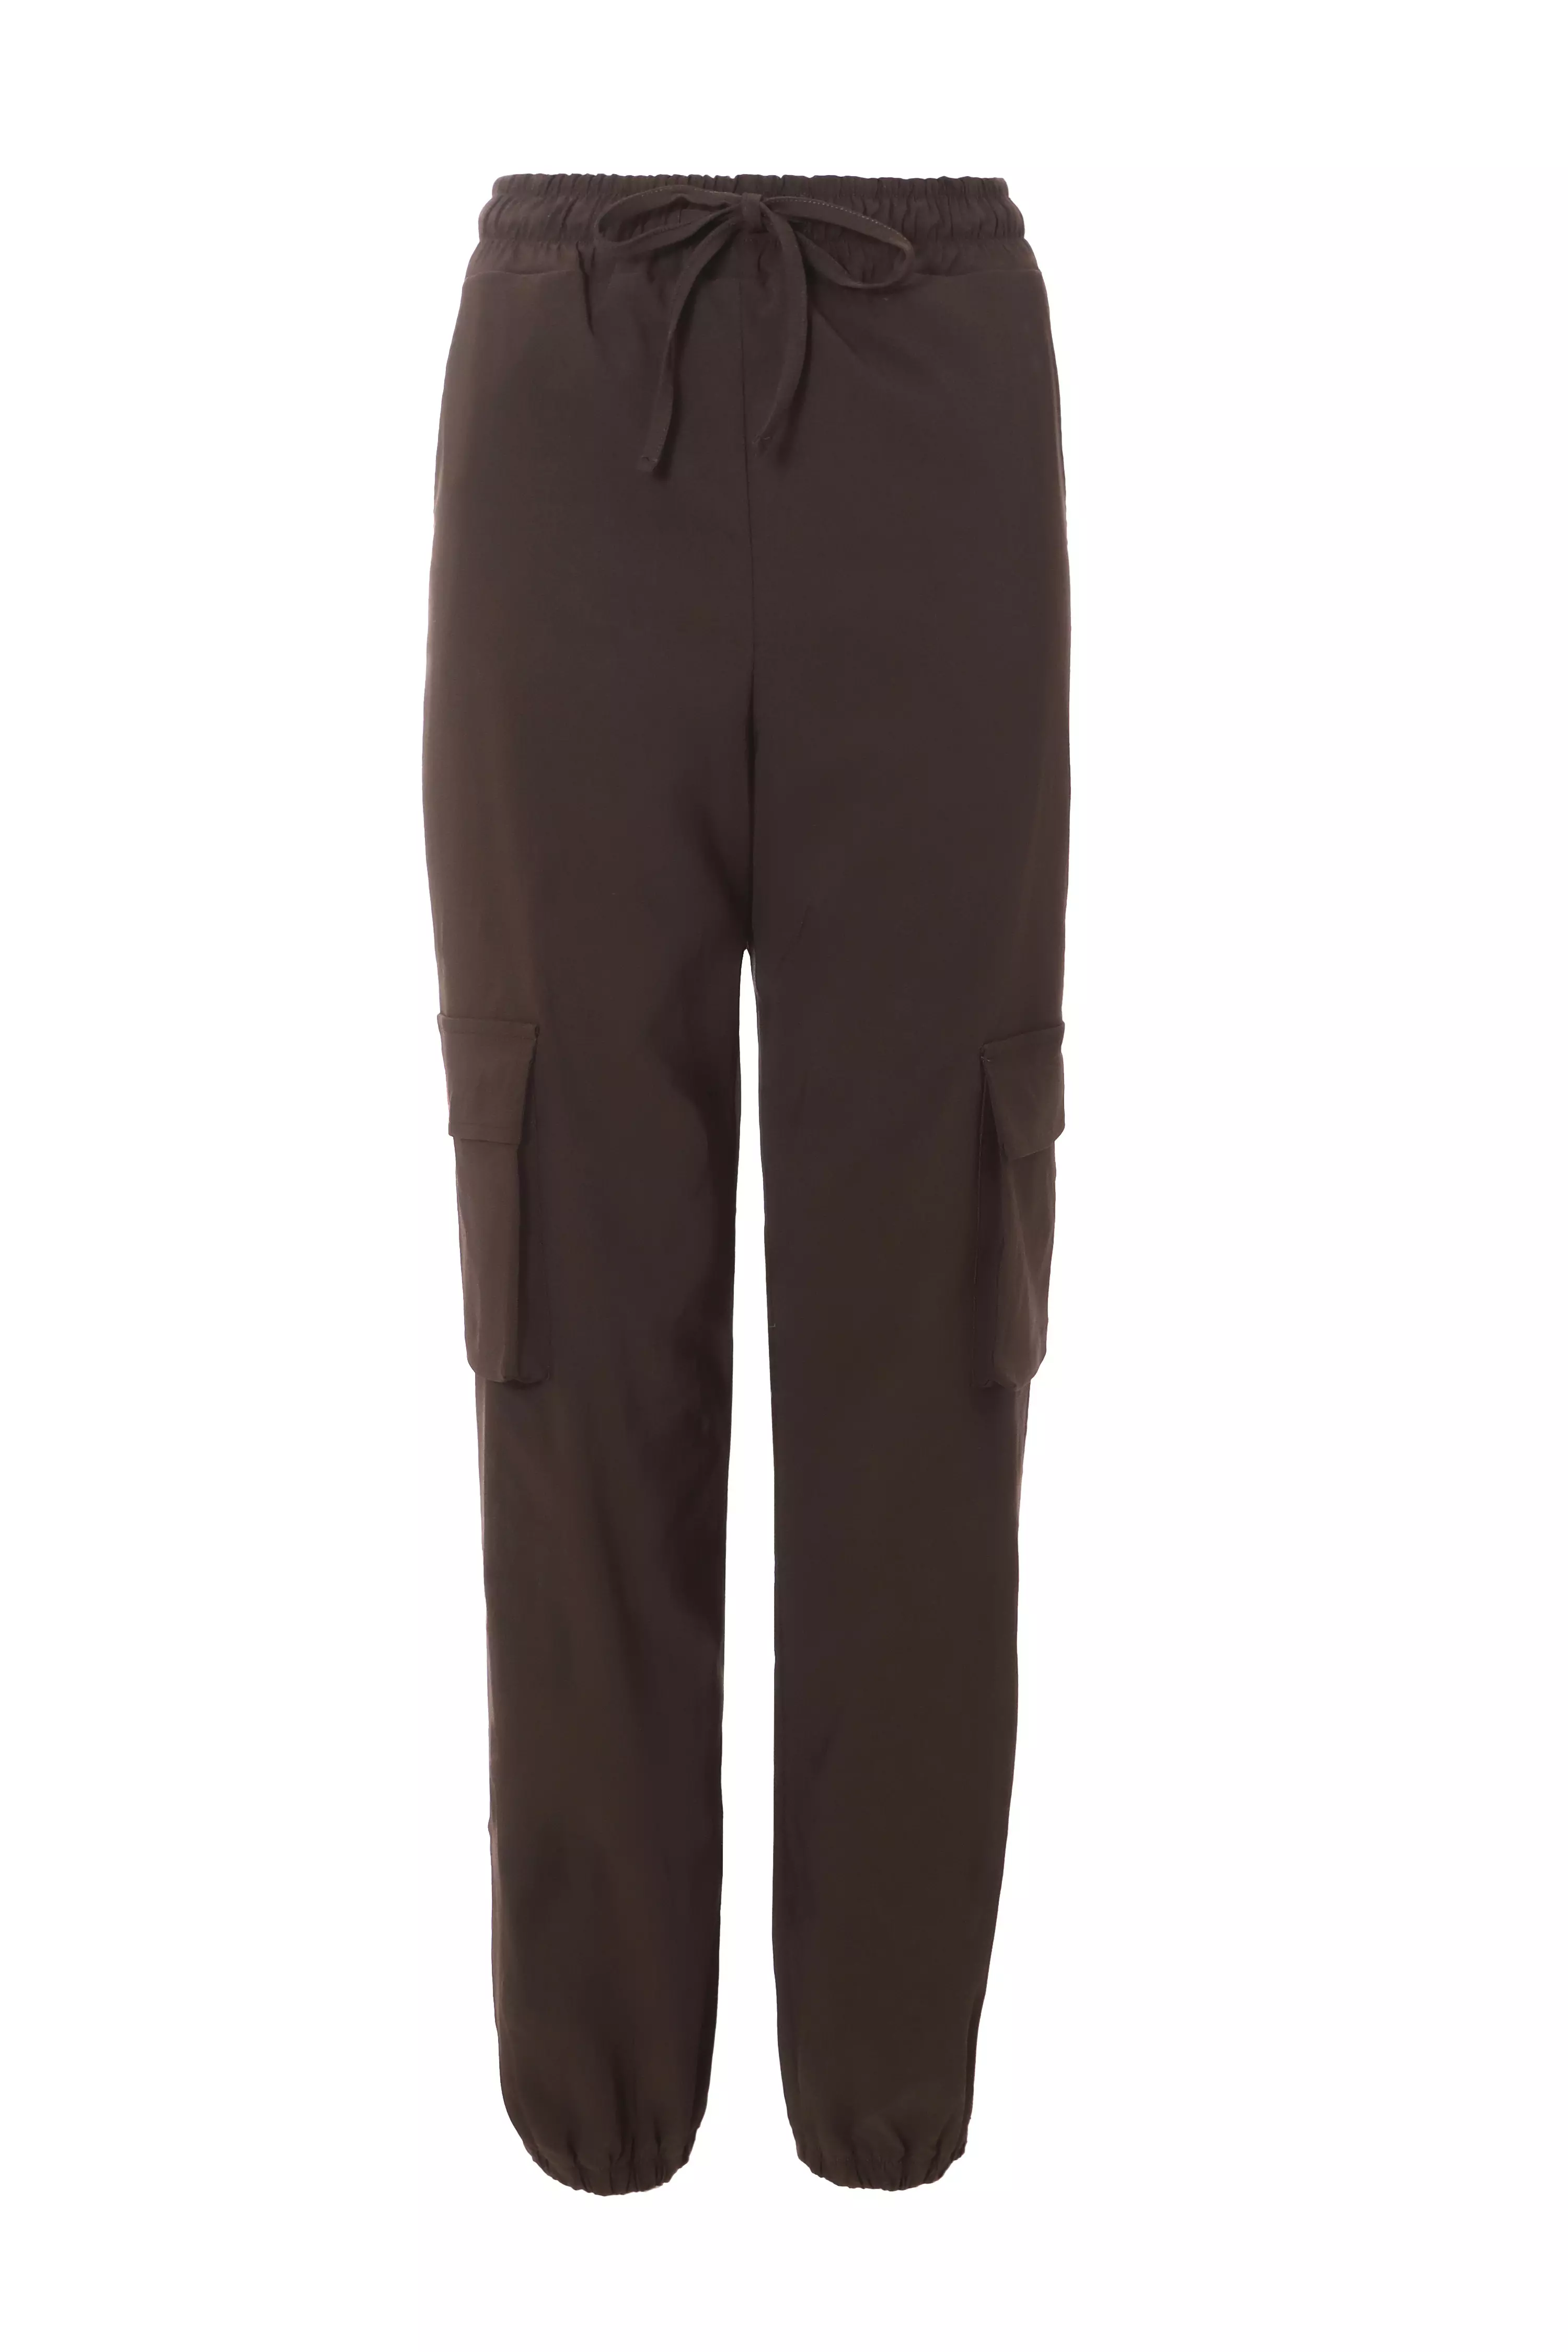 Brown Tie Waist Cargo Trousers - QUIZ Clothing